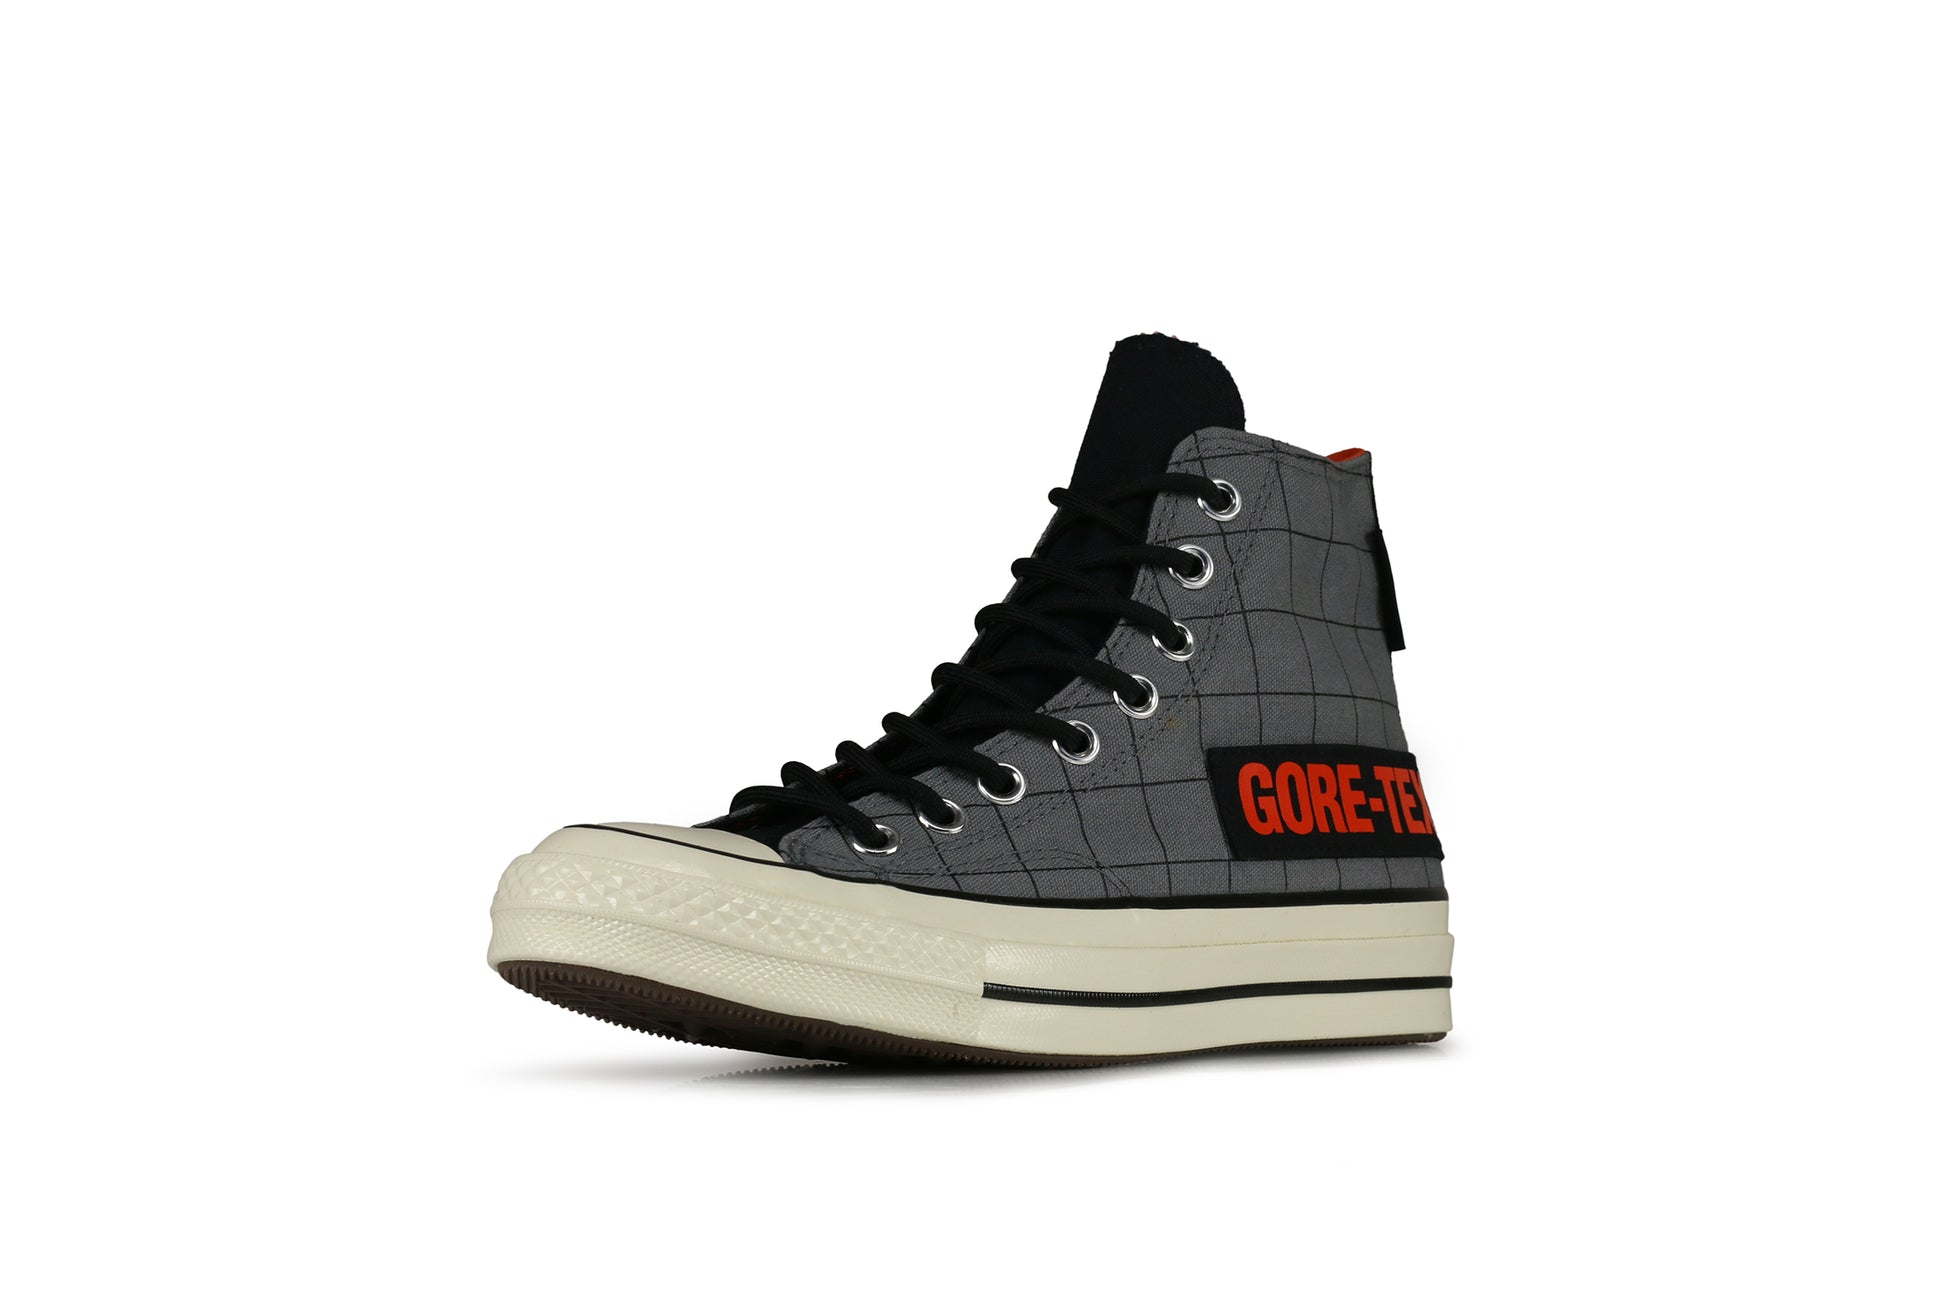 Giddy Up in the New Converse All-Star Western Boots II Z Hi - Tex Print" – GmarShops - Converse Chuck 70 Hi Gore